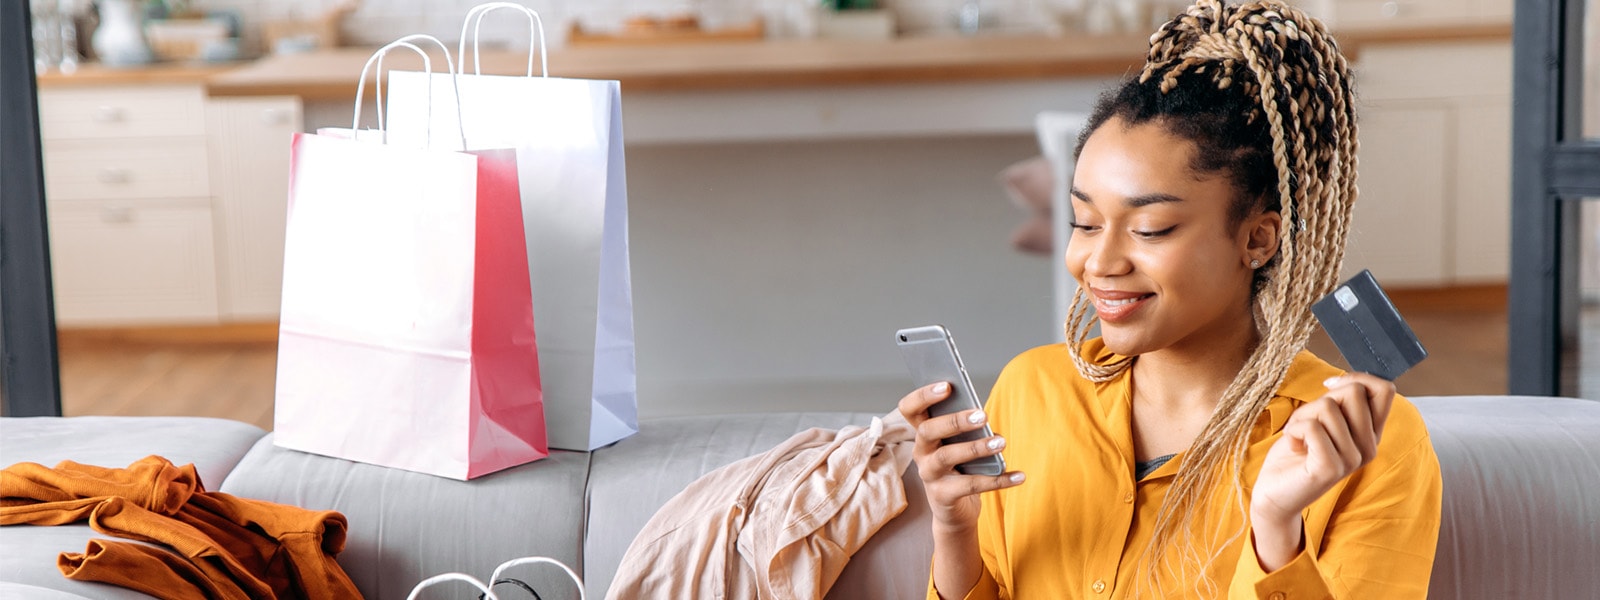 a black woman in a yellow shirt sits on her couch, surrounded by shopping bags and with a credit card in hand one hand and a phone in the other, indicating she is online shopping